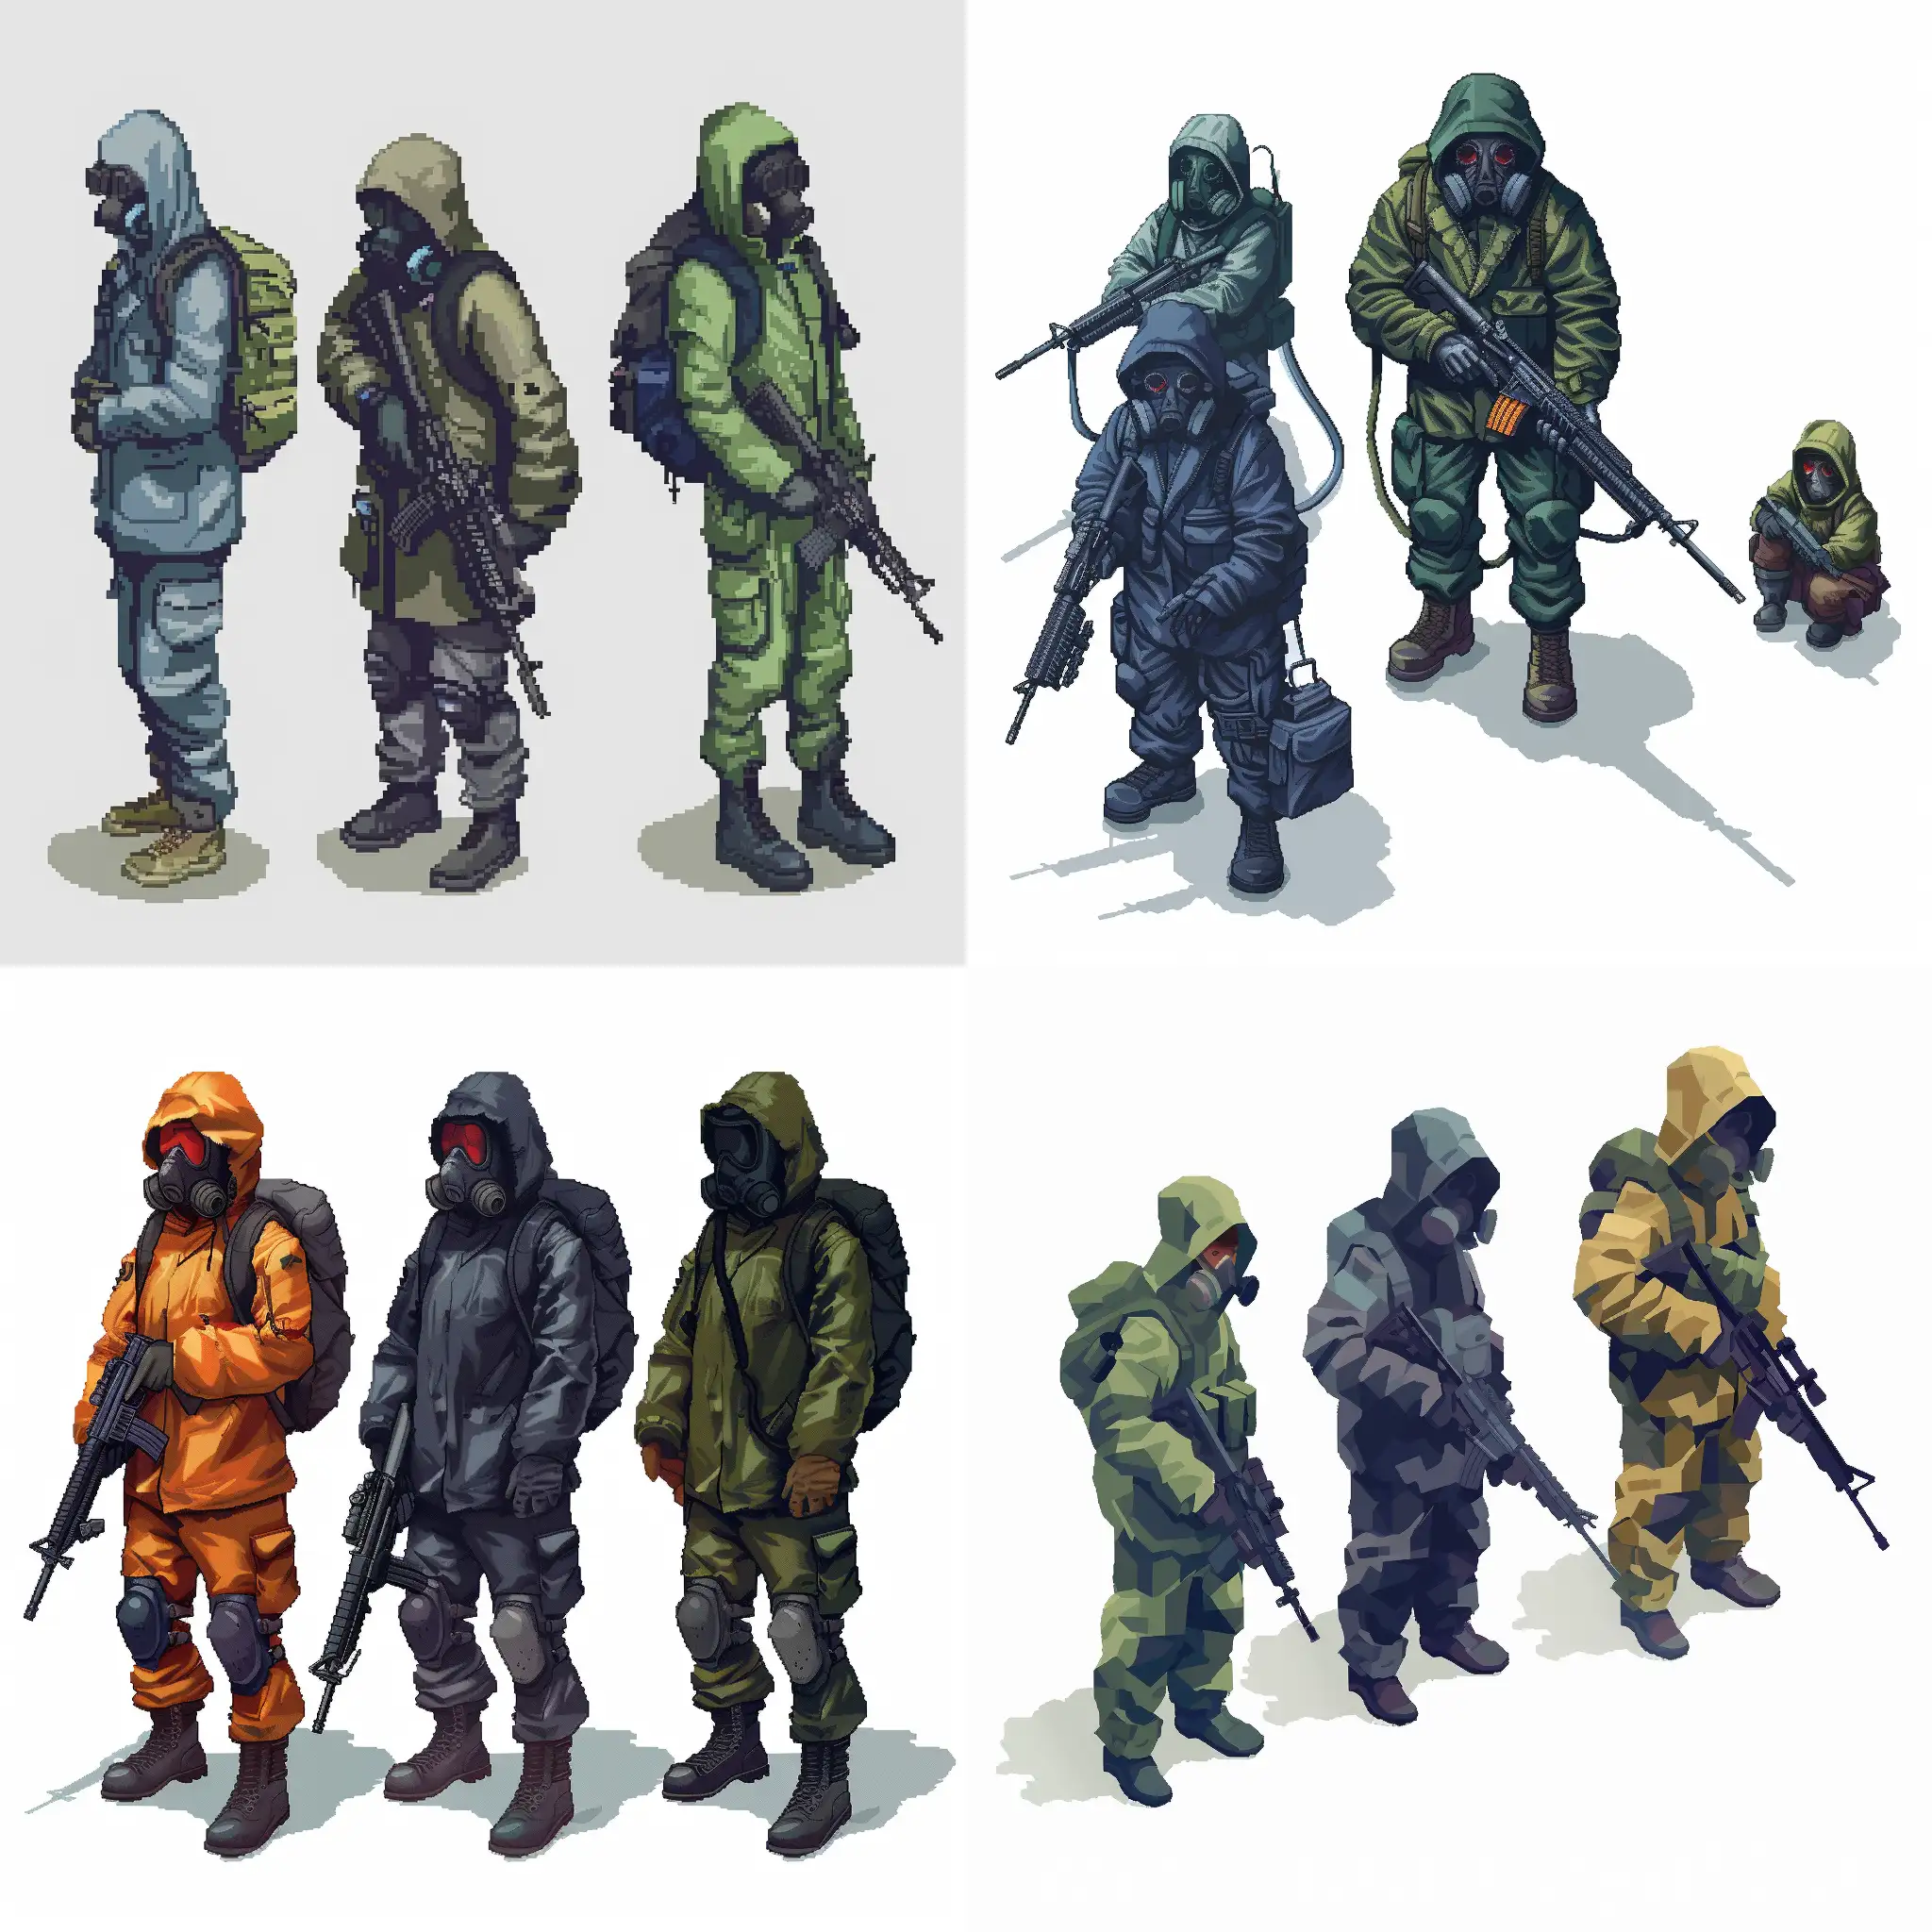 Pixel-Art-Stalker-Characters-in-Isometric-Style-with-Raincoat-and-Gas-Masks